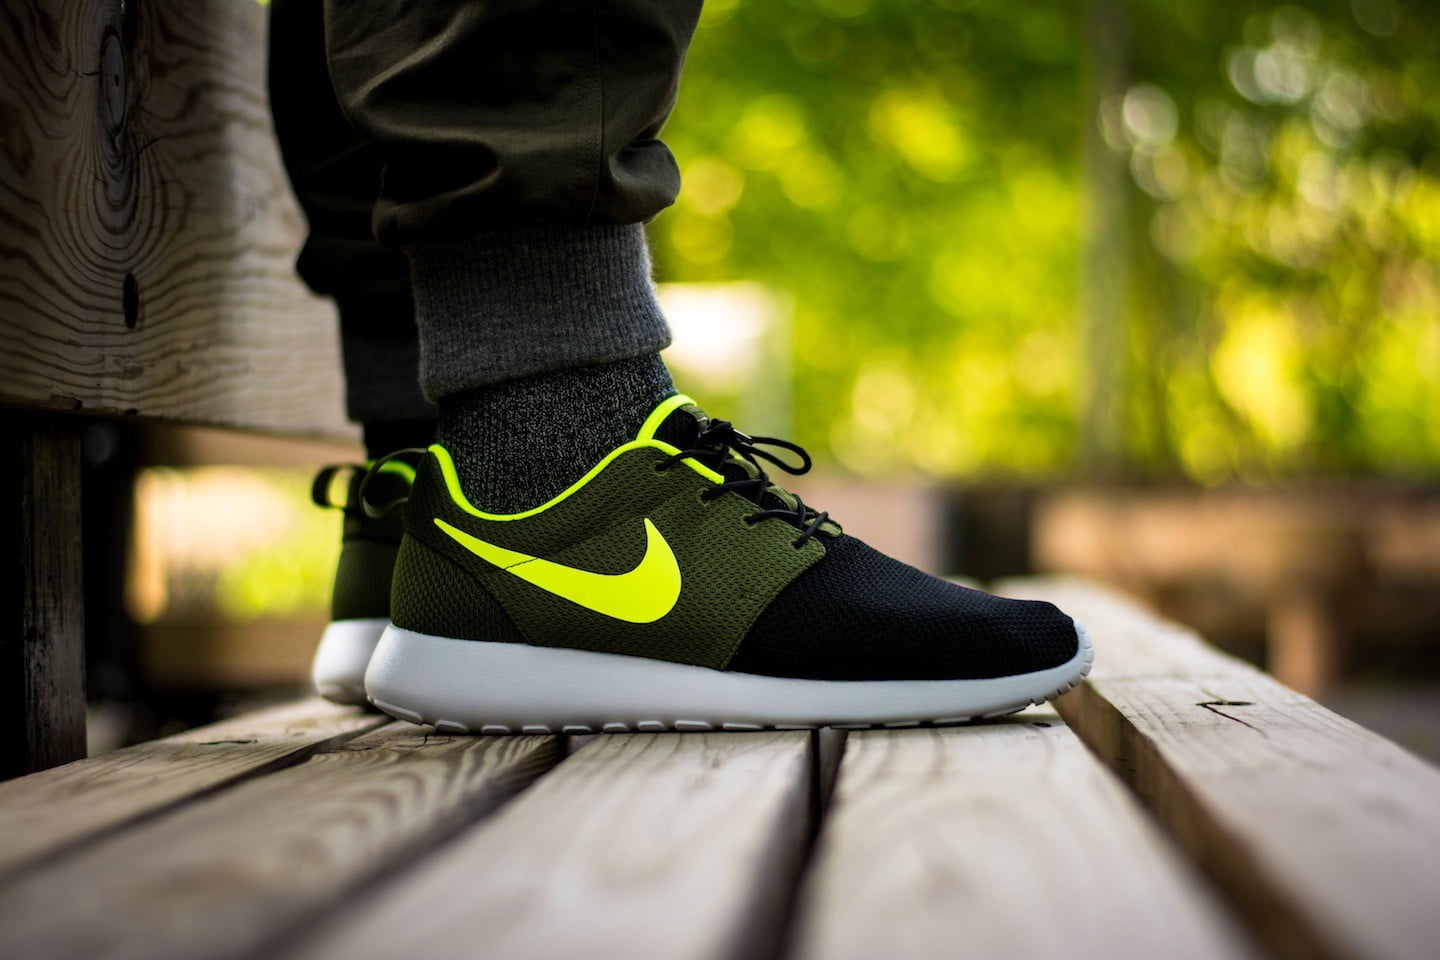 pair of black-yellow-and-white Nike Roshe Run sneakers, low section